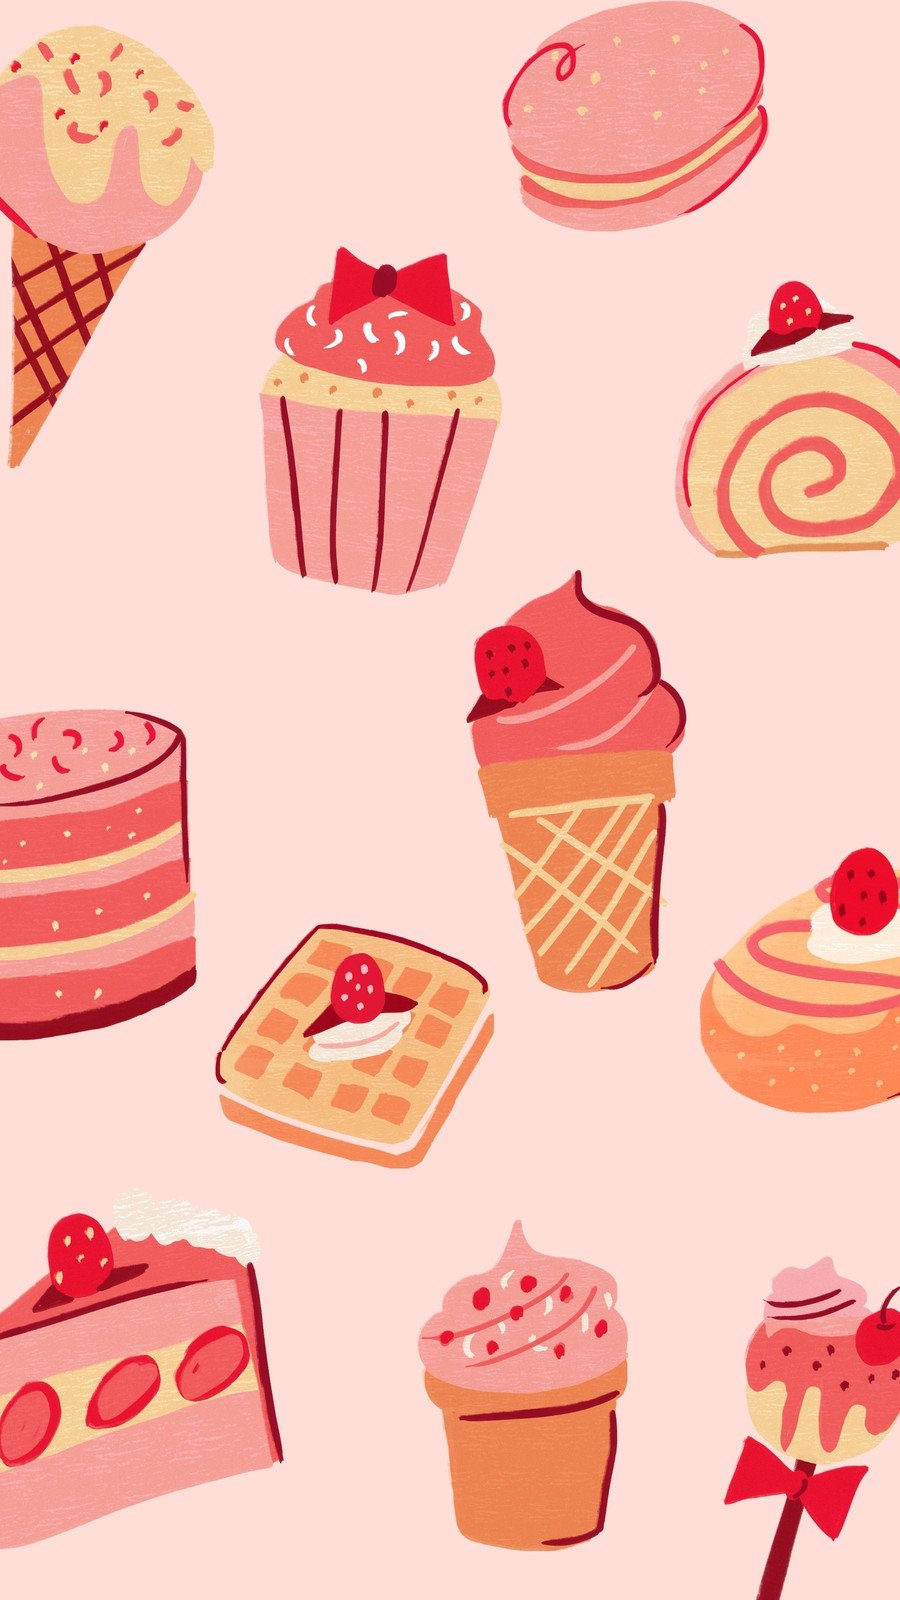 Cake Png Stock Illustrations – 1,646 Cake Png Stock Illustrations, Vectors  & Clipart - Dreamstime